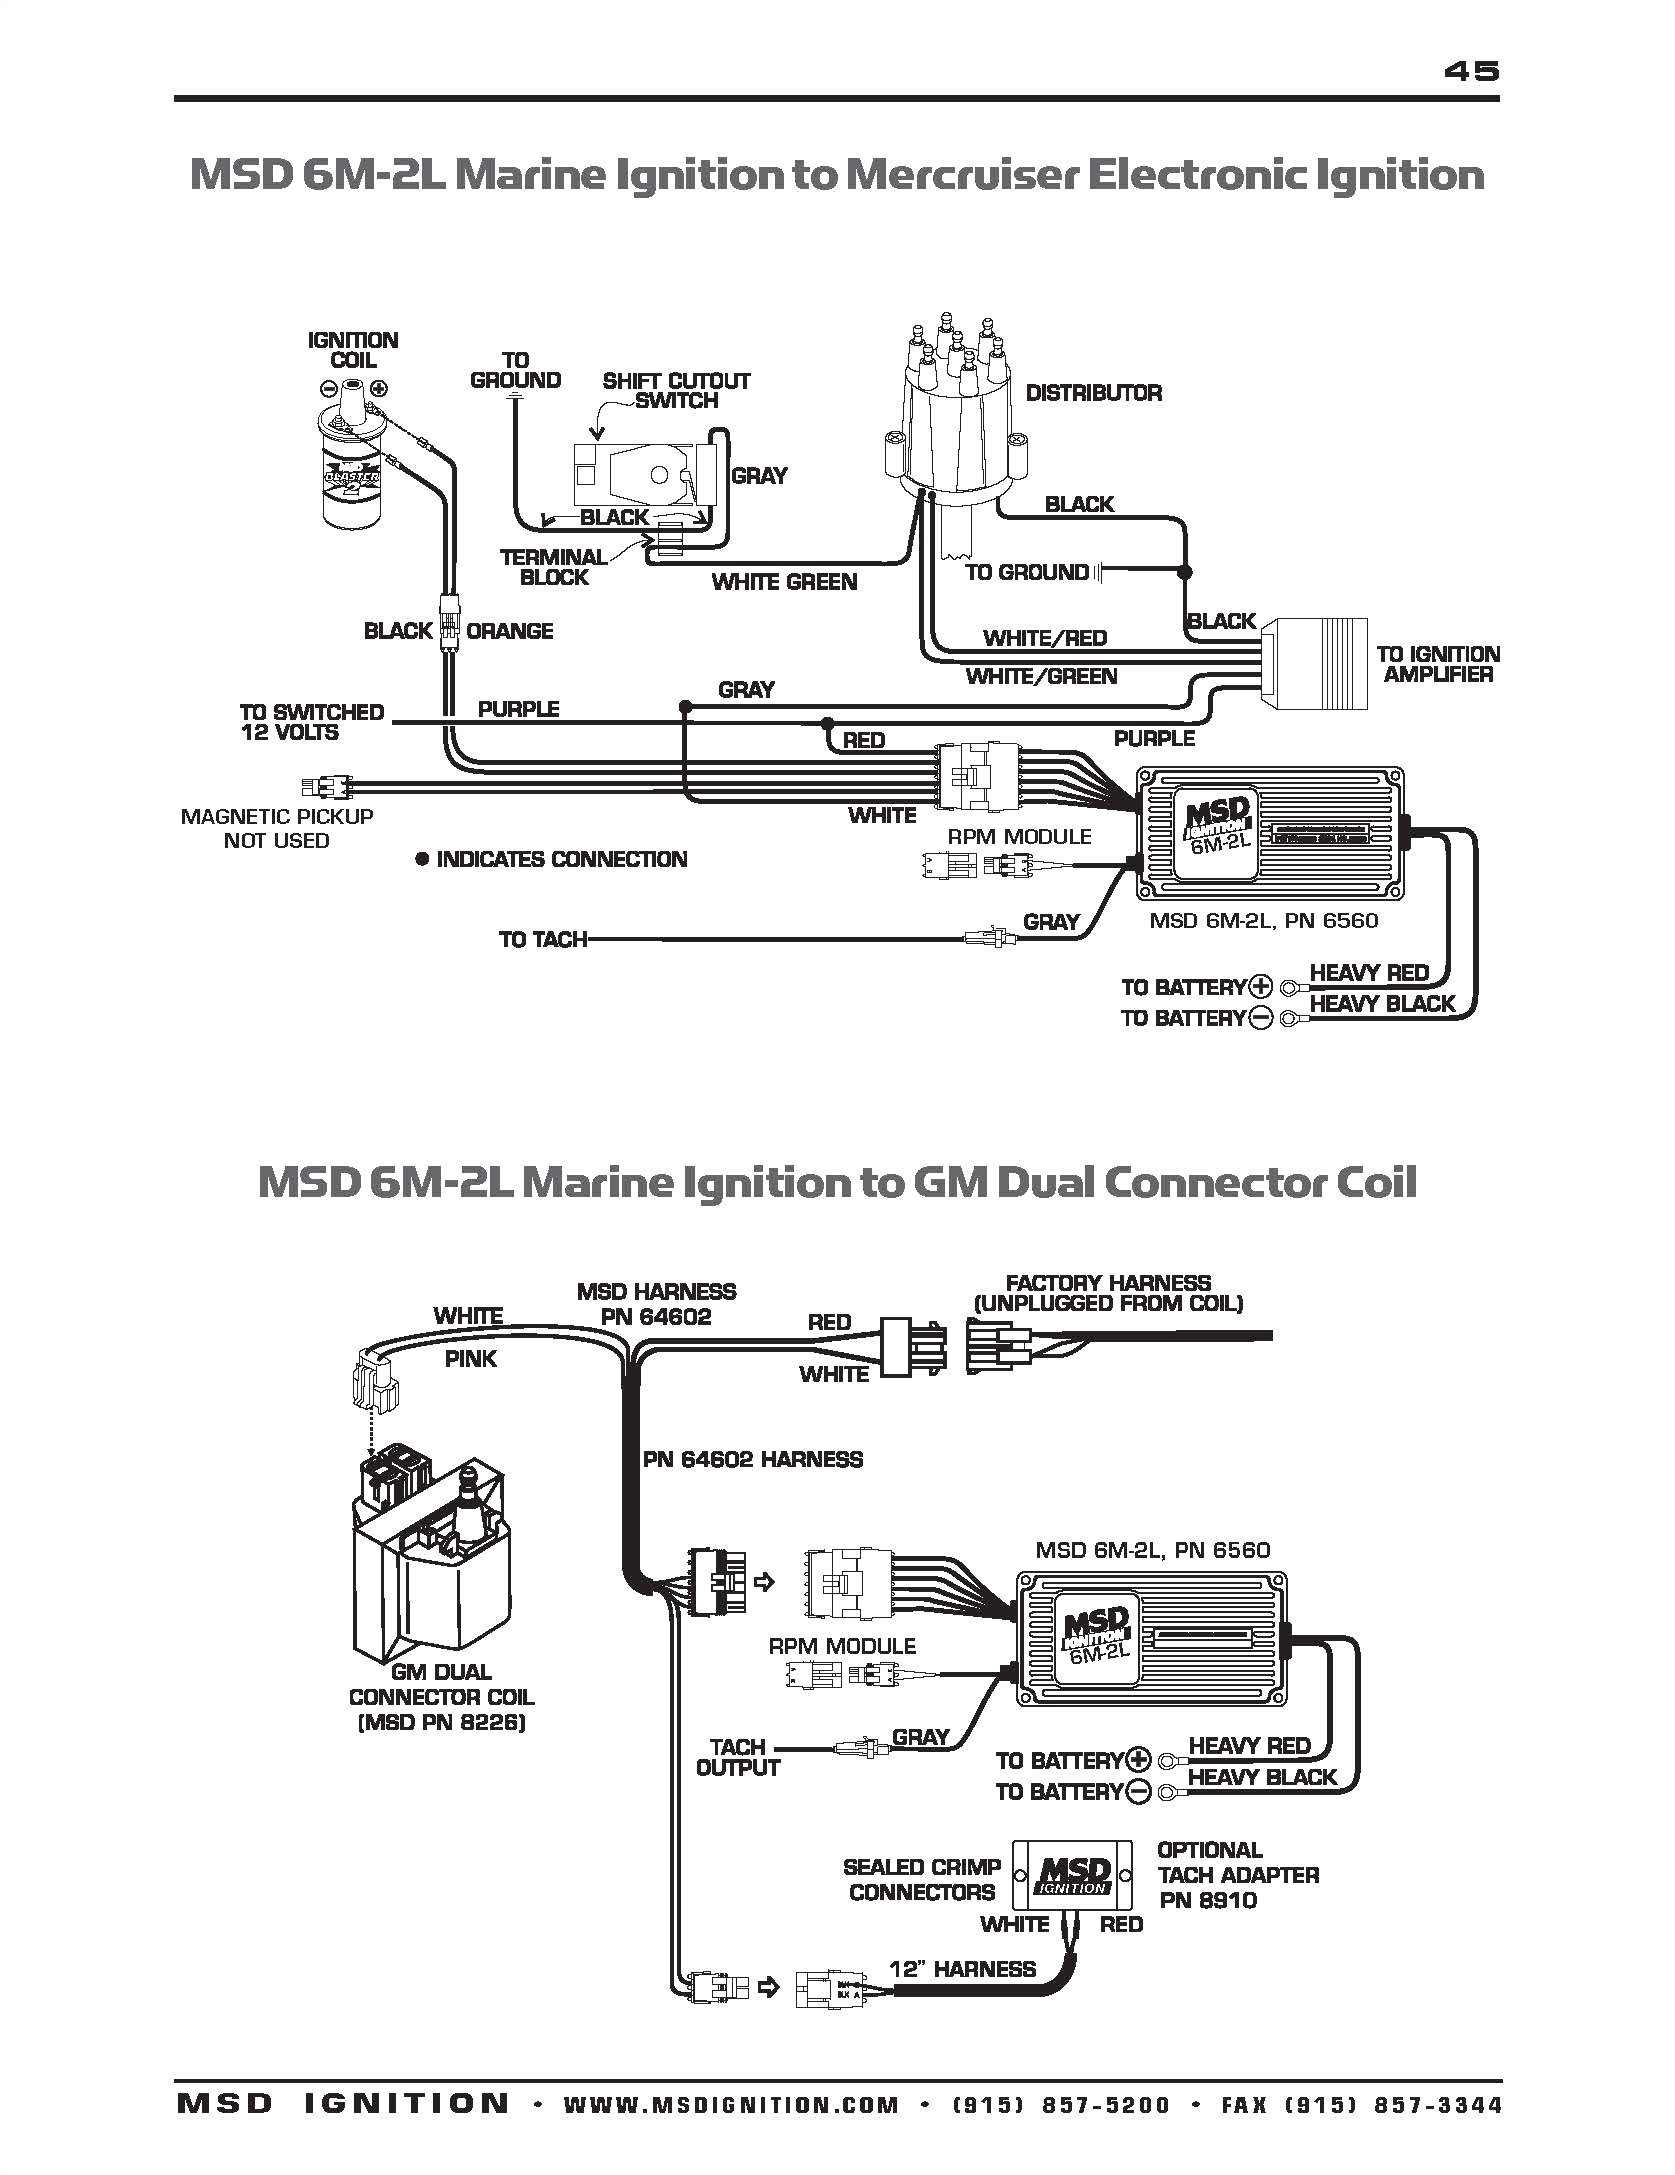 msd distributor wiring diagram new ford hei distributor wiring diagram beautiful 2001 yamaha warrior pictures of msd distributor wiring diagram jpg